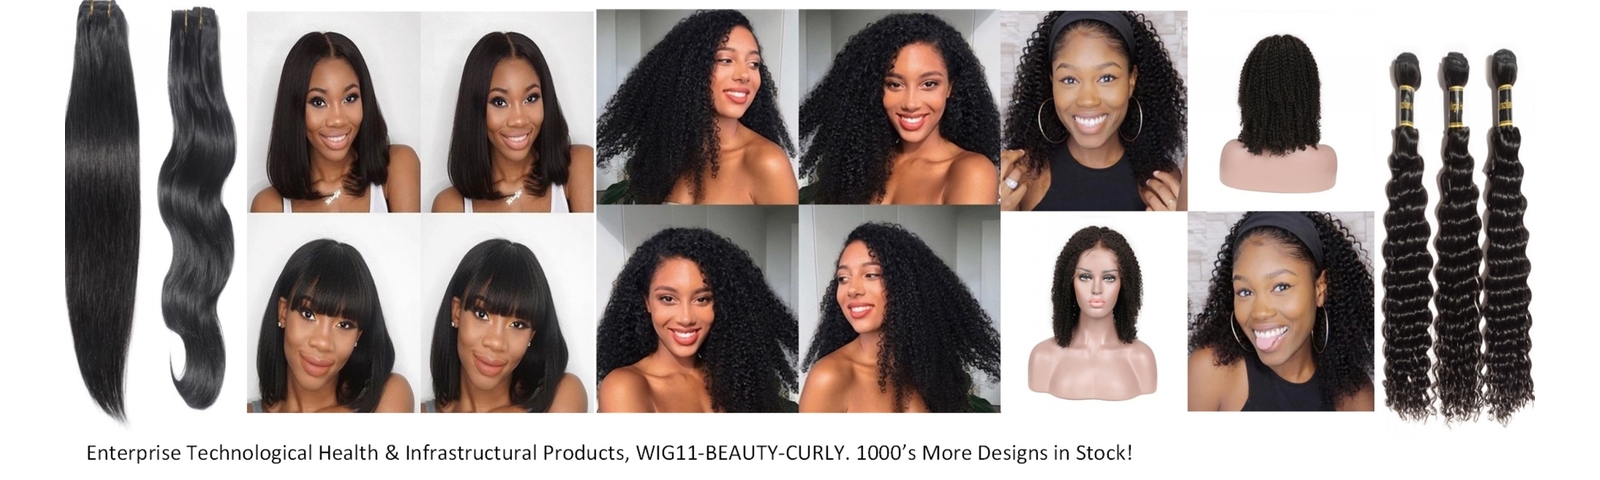 WIG11-BEAUTY-CURLY